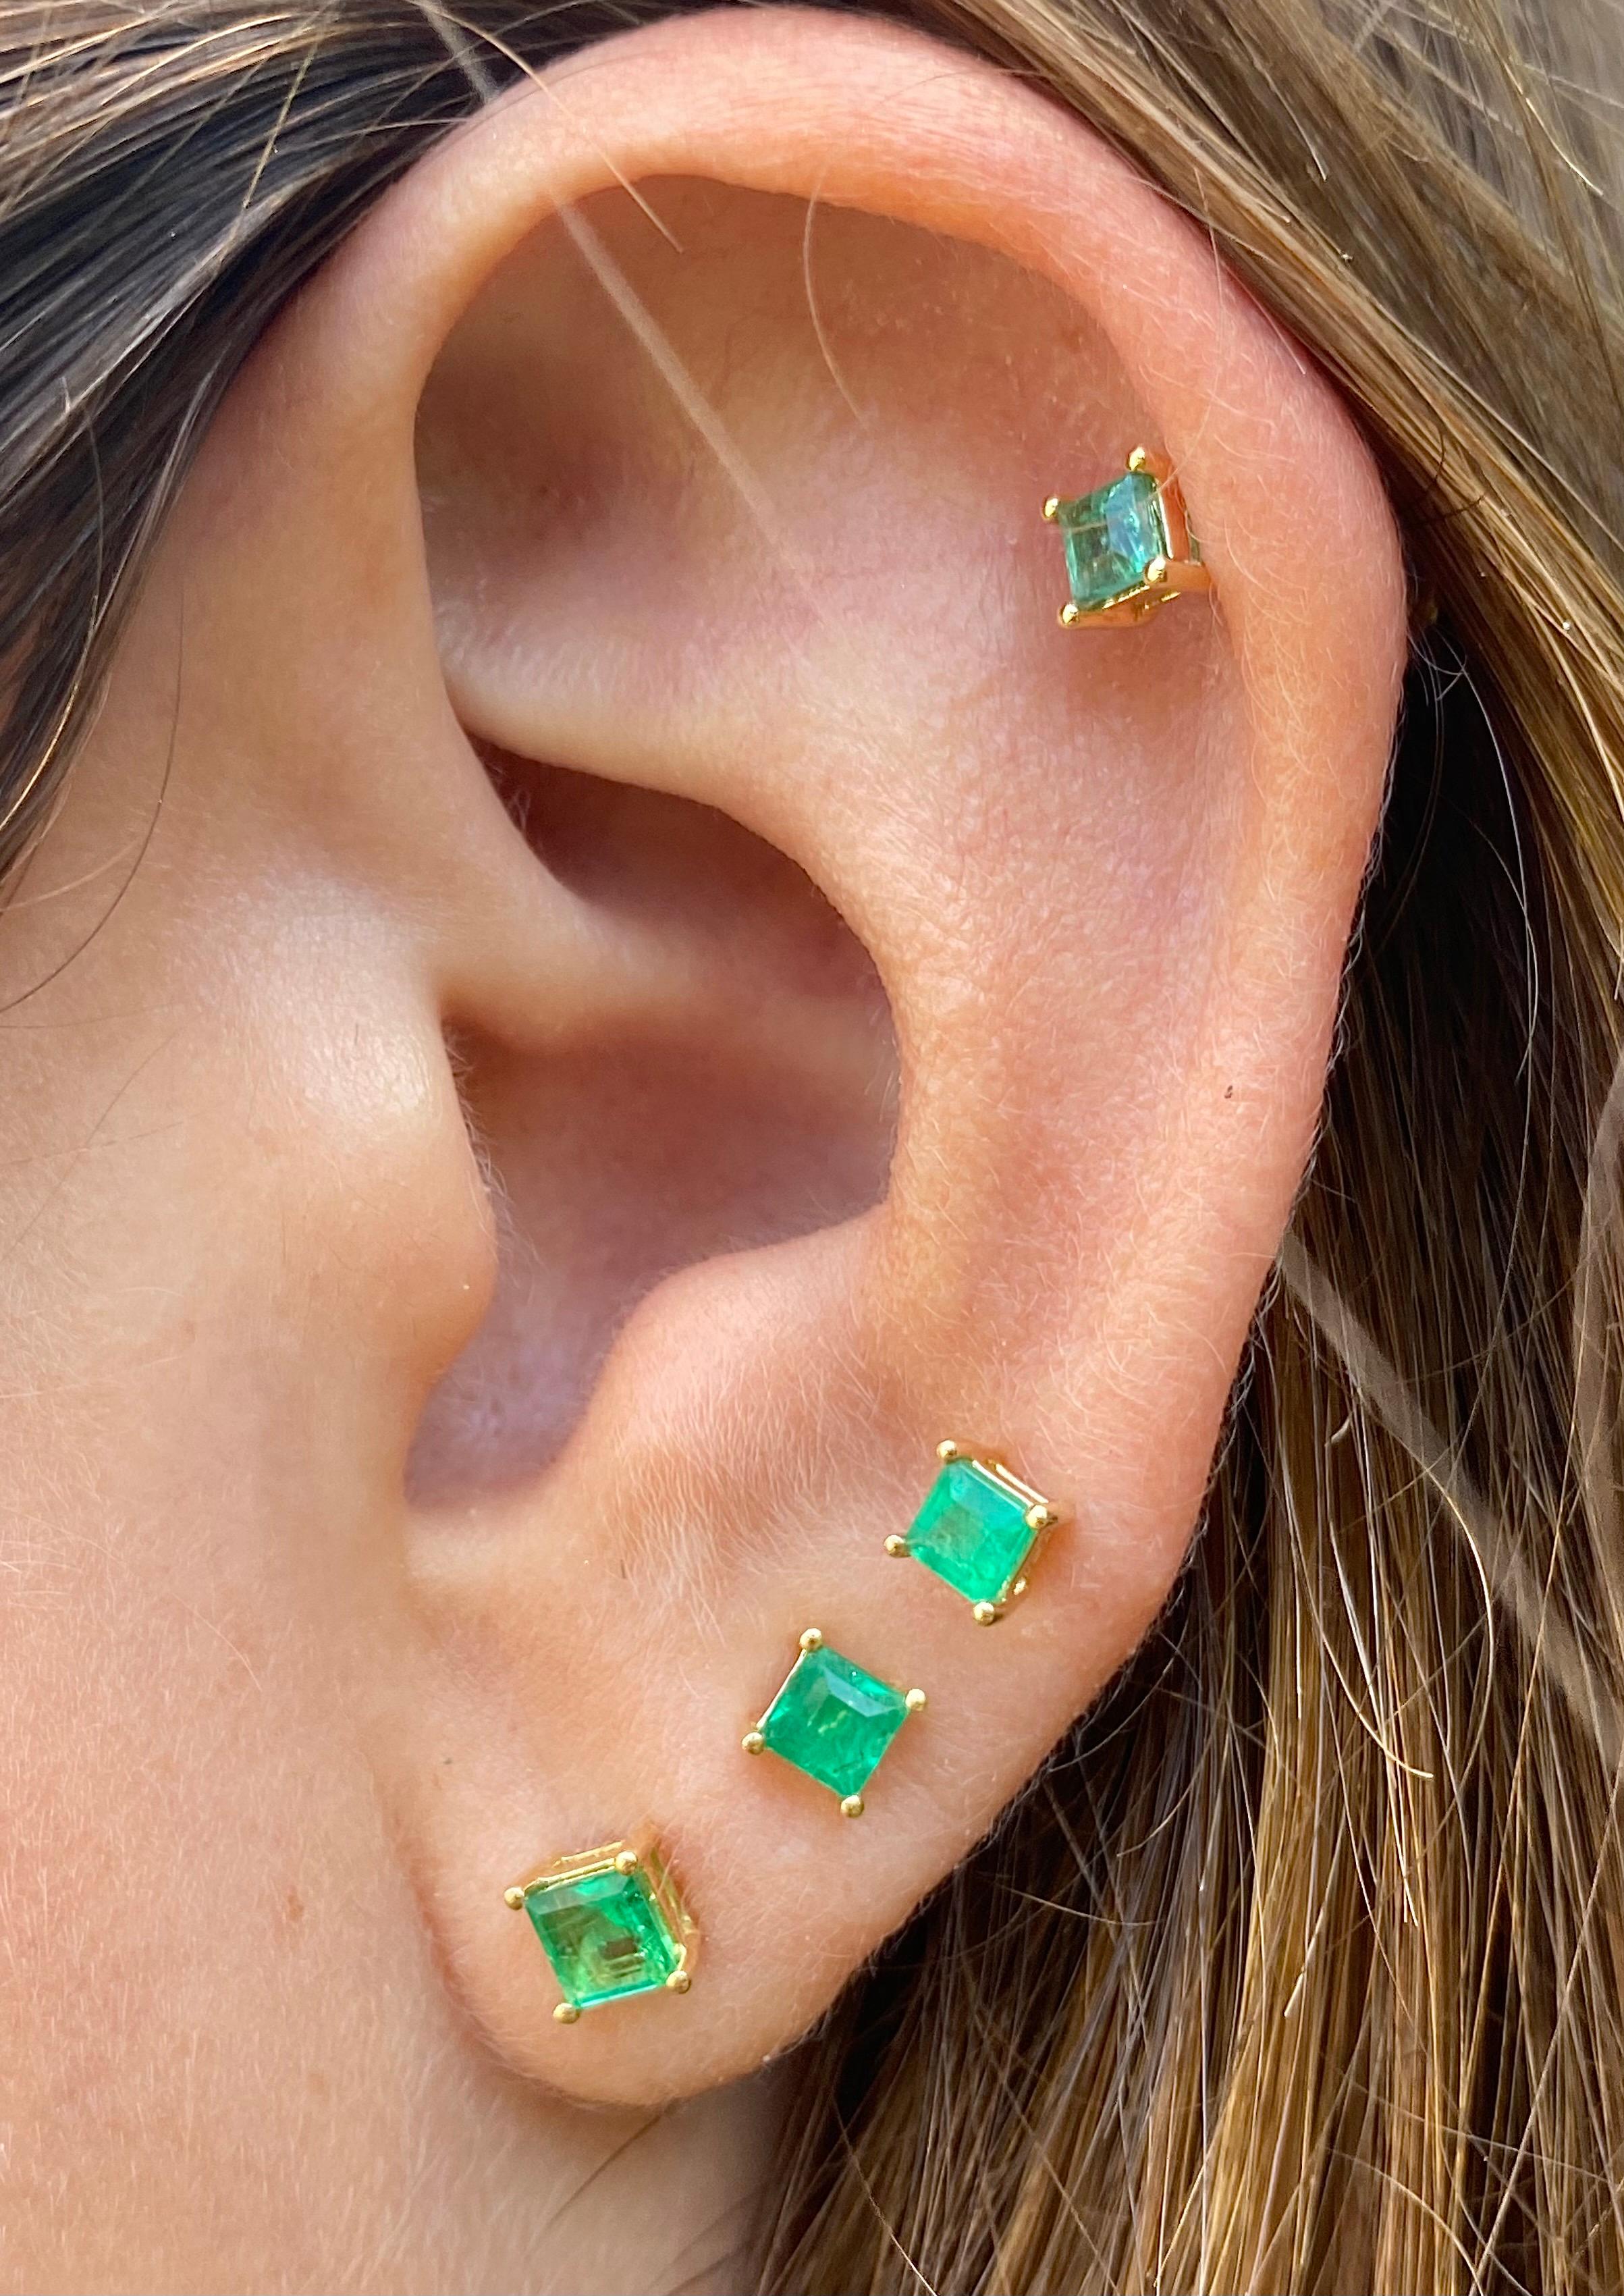 Gorgeous natural Colombian Emeralds set in 18k solid gold. Emeralds with step-cut facets for optimal light reflection and brilliance (stones shine brightest under sunlight). Premium grade 18k solid gold is double rhodium plated to ensure lifelong